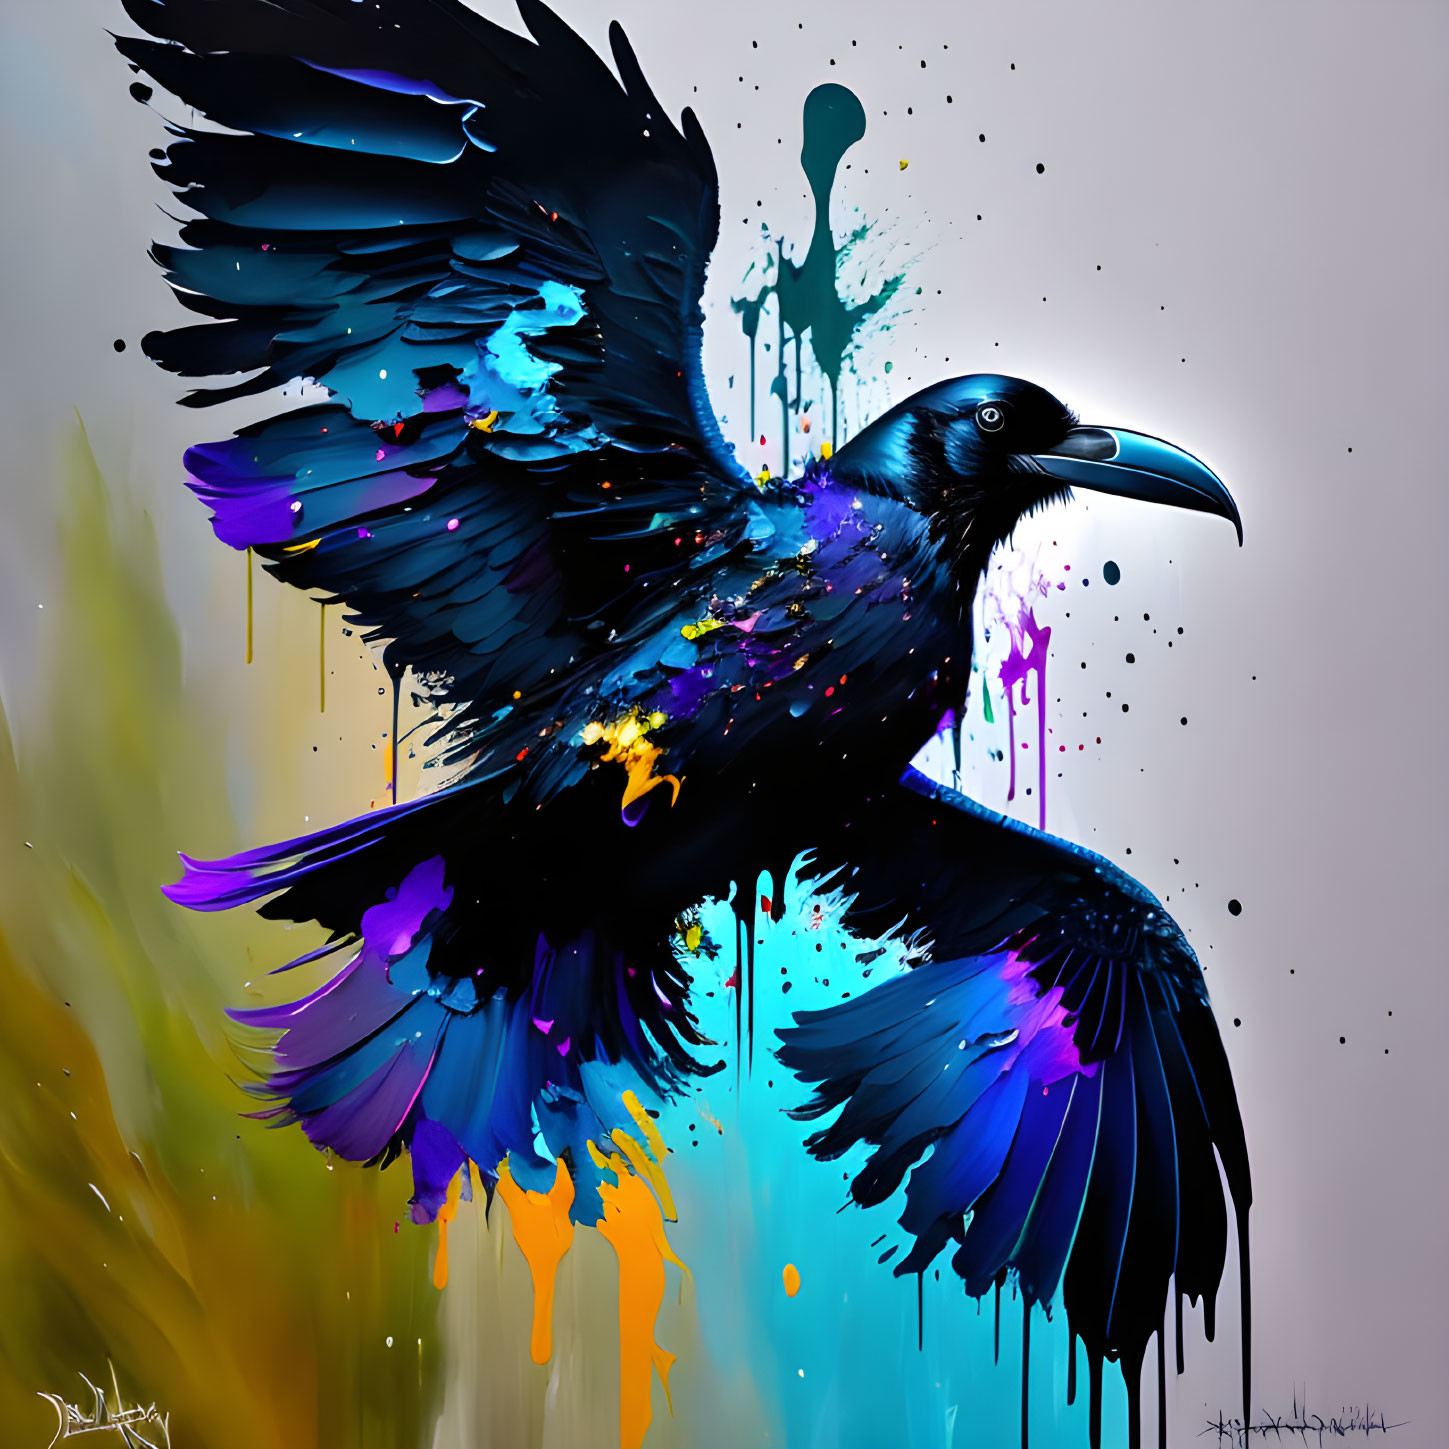 Colorful digital artwork: Crow with spread wings and abstract details